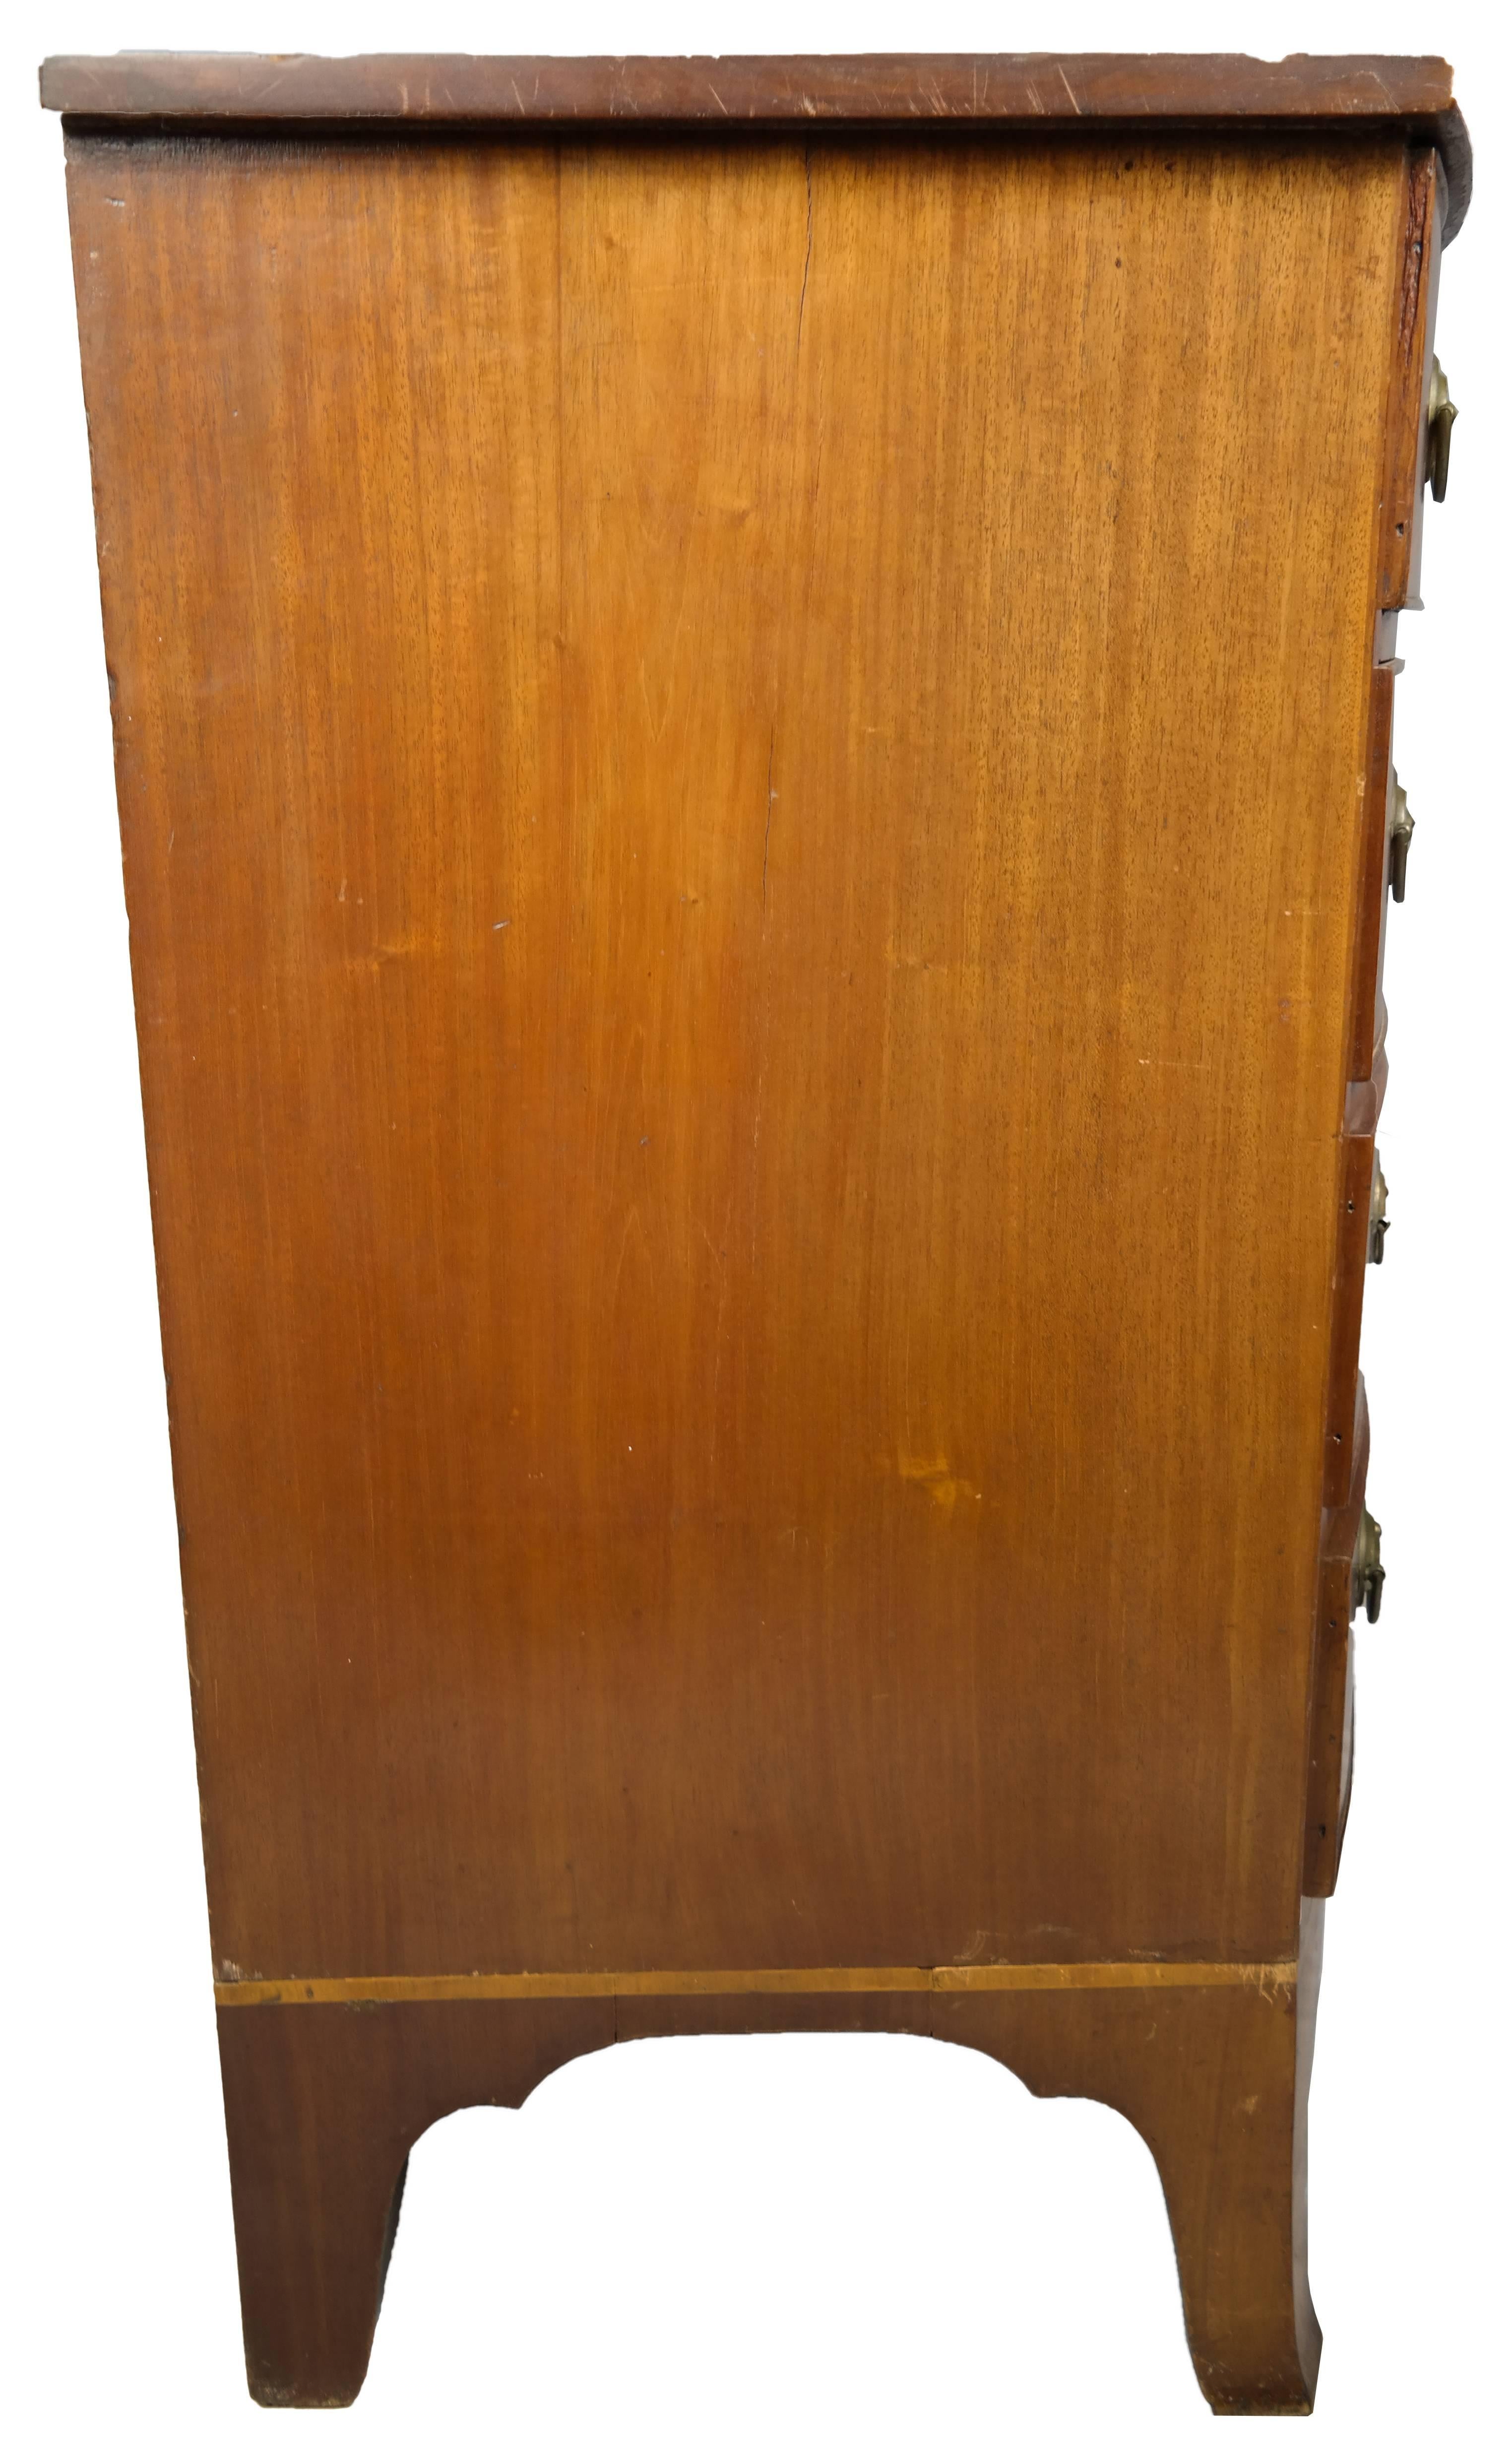 Late 18th Century American Mahogany Bowfront Chest of Drawers, circa 1790. 5